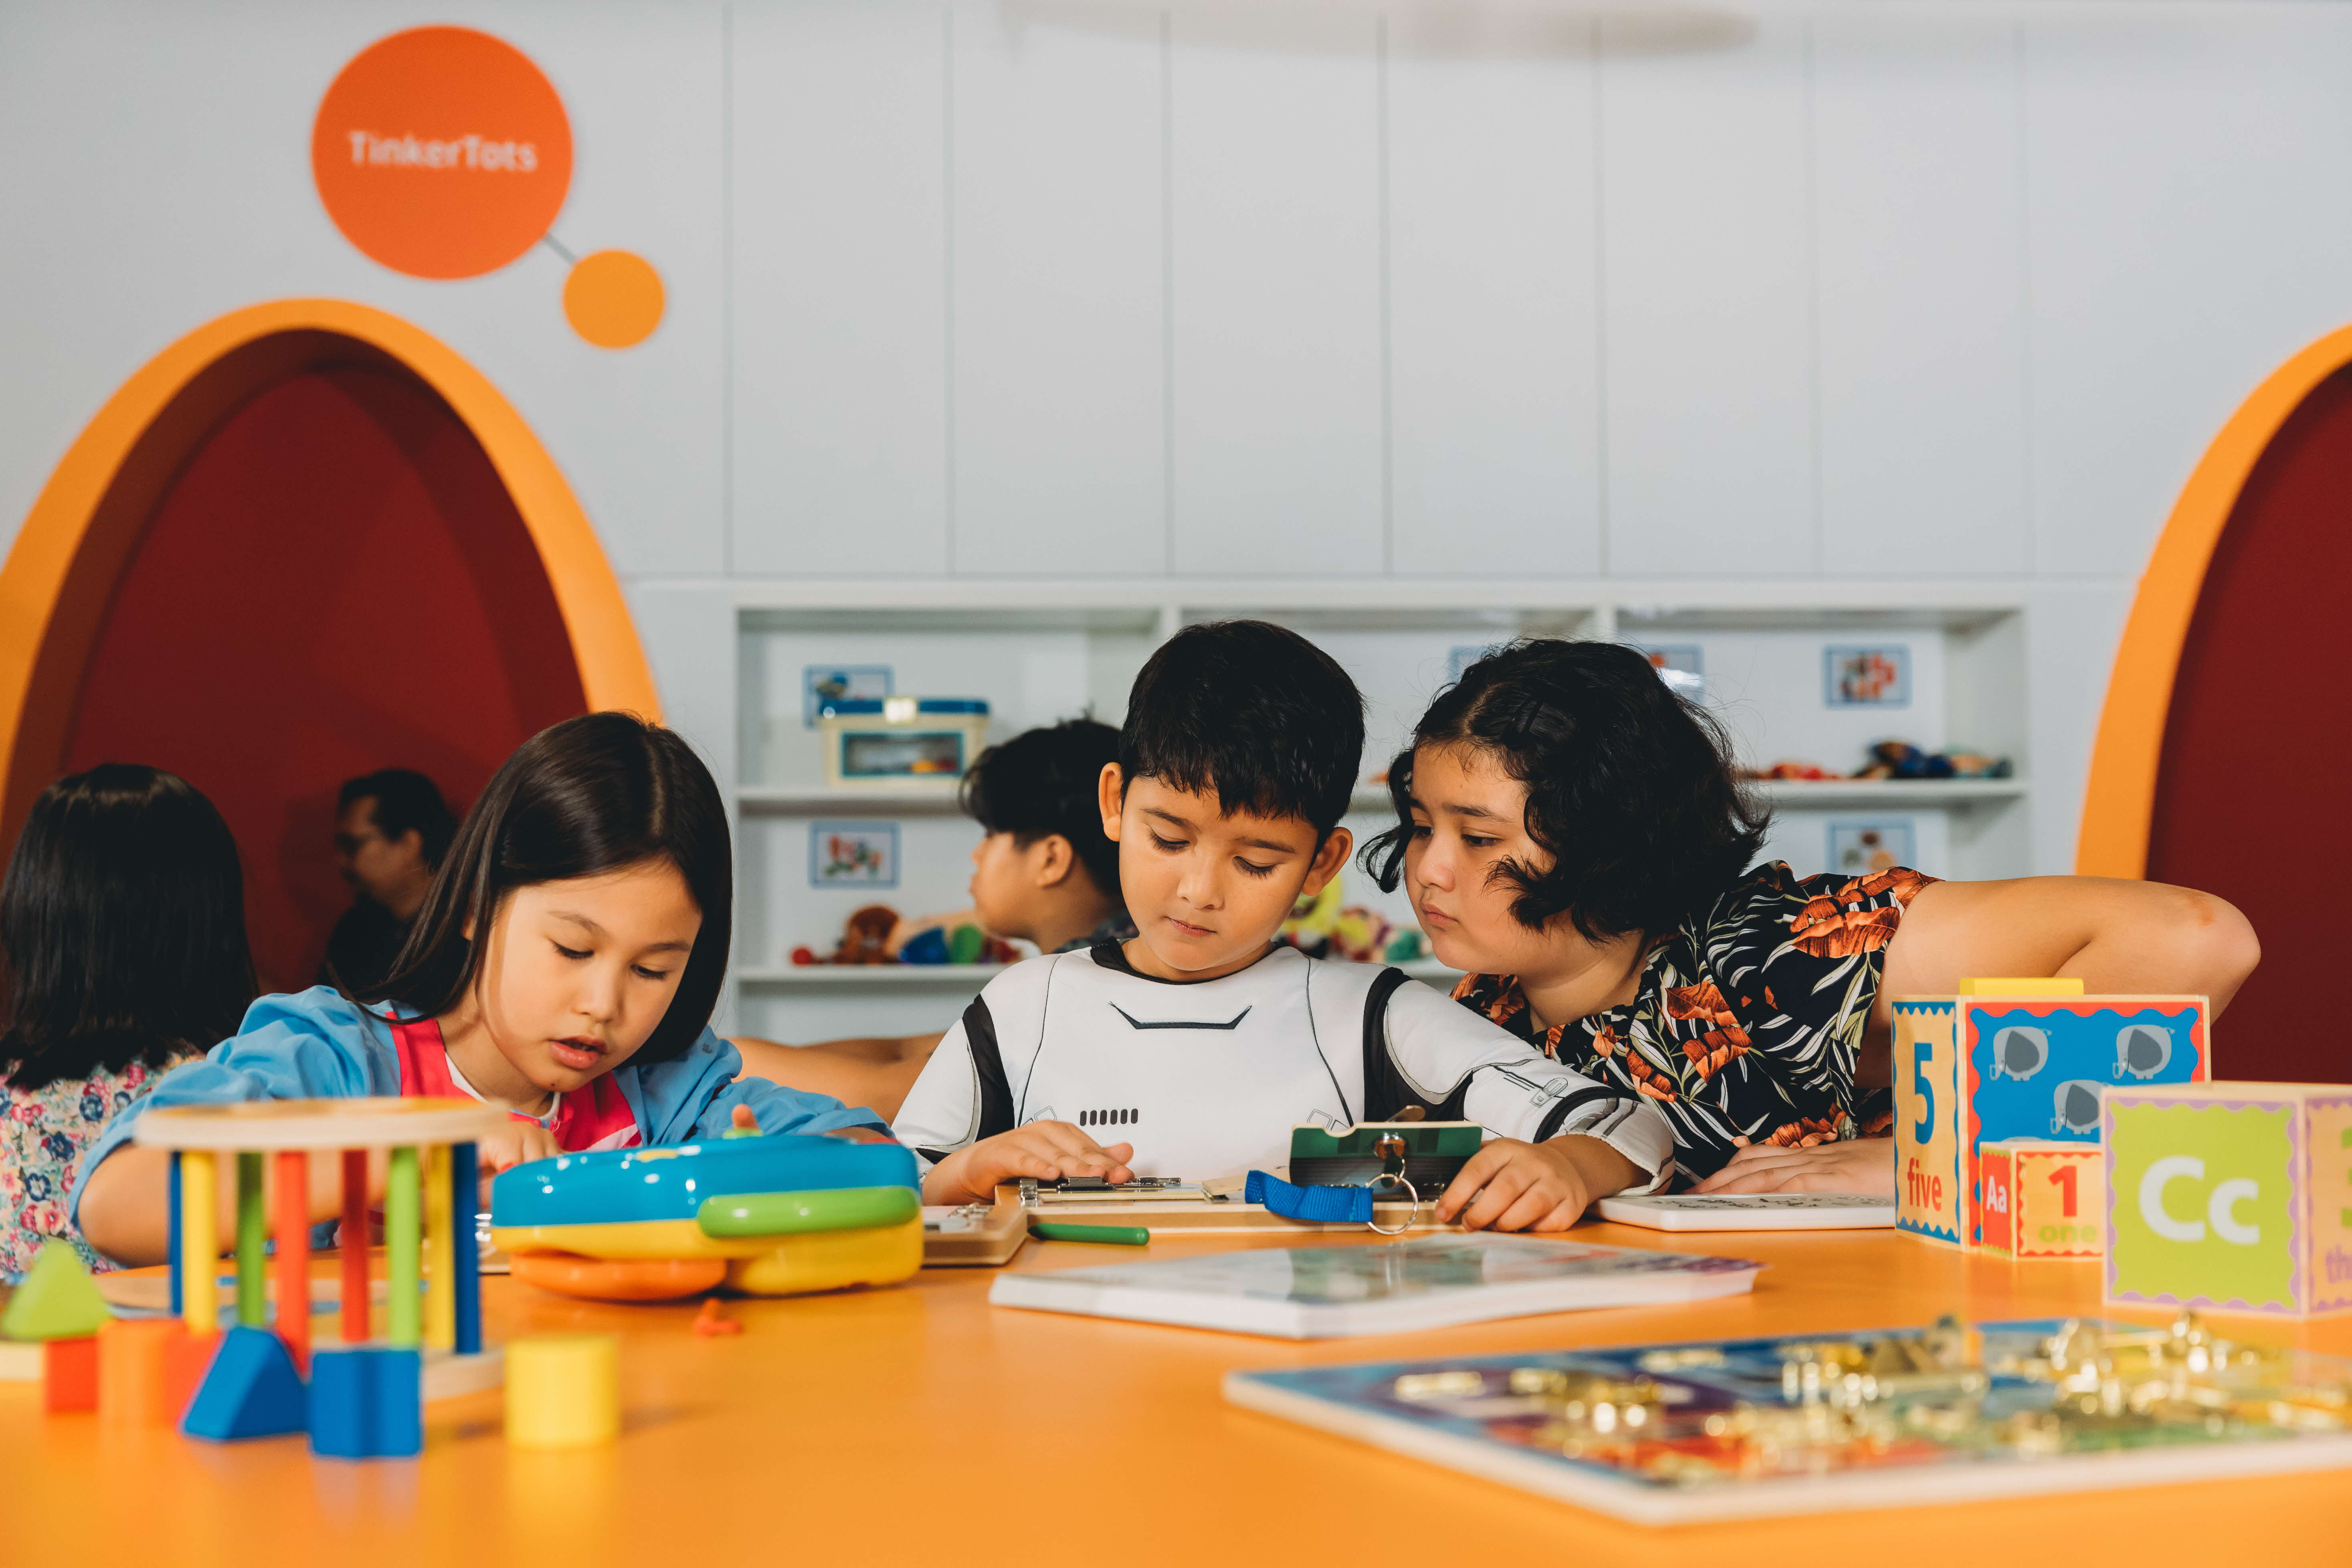 A girl and boy are seated at a table in TinkerTots focused on their building activity while another girl looks on curiously.